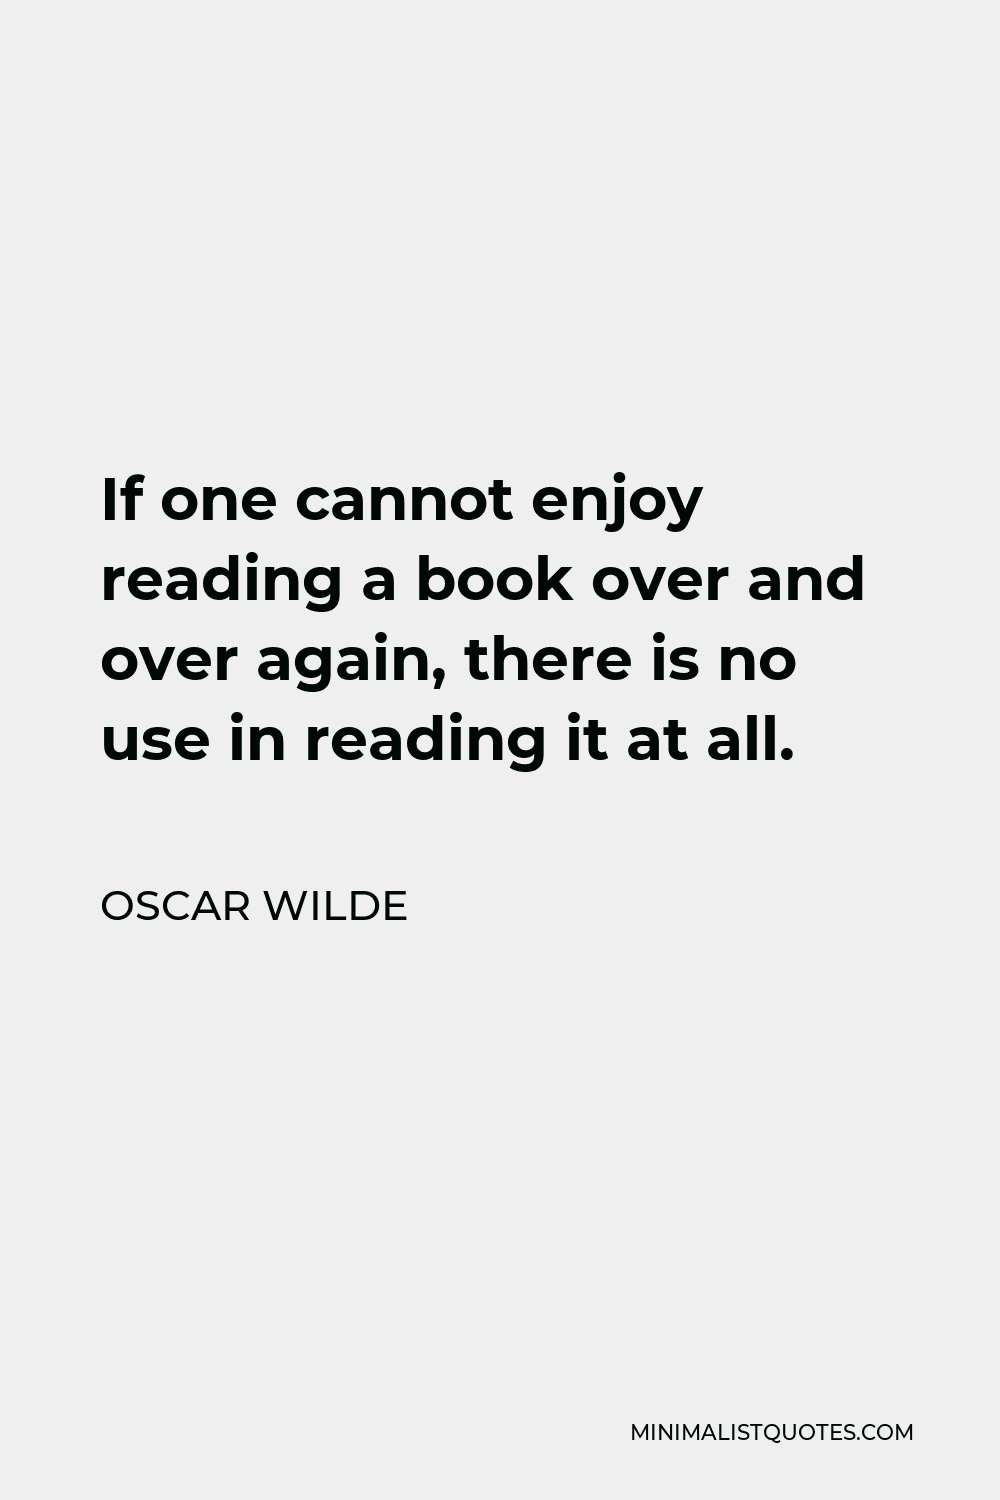 Oscar Wilde Quote - If one cannot enjoy reading a book over and over again, there is no use in reading it at all.